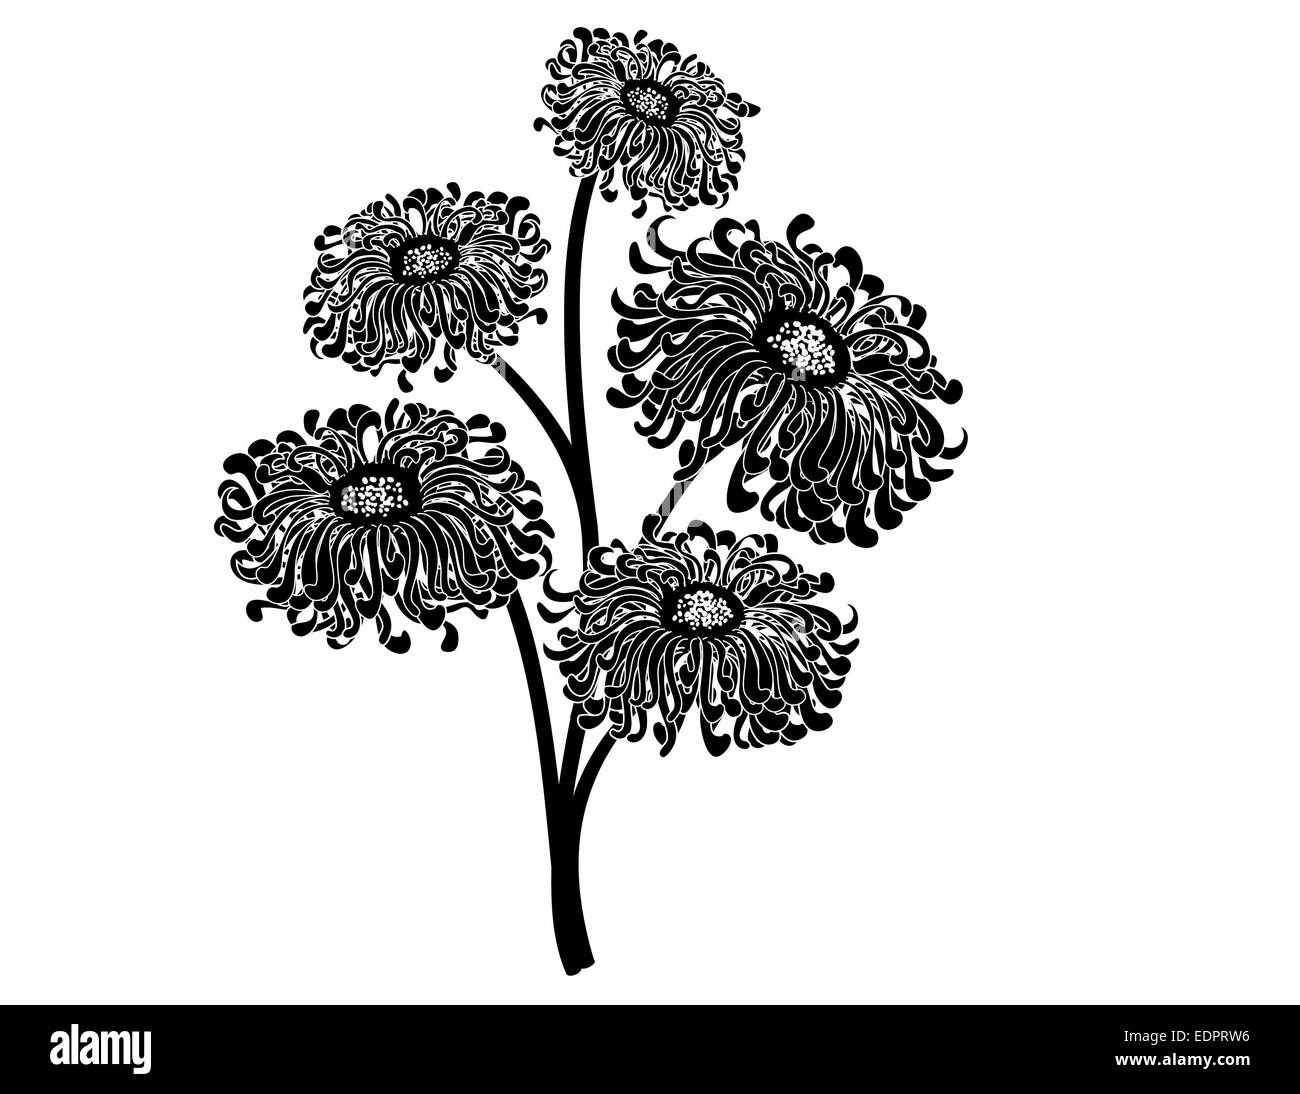 Elegant and detailed black & white illustration of a bouquet of five gorgeous flowers for decorative or romantic themes Stock Photo